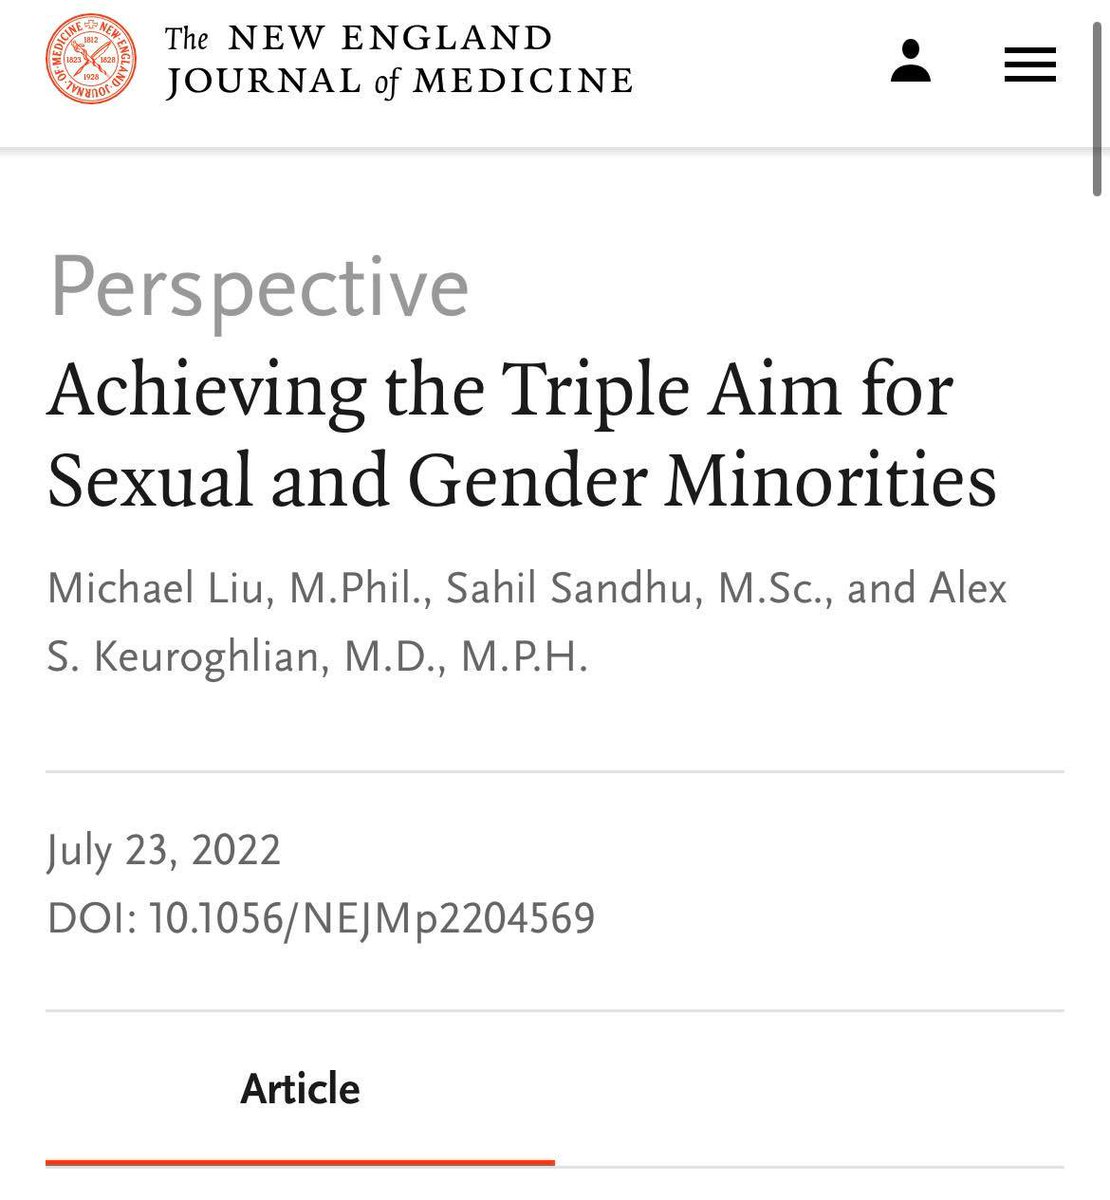 Our new paper in @NEJM discusses how the health care sector could leverage the “Triple Aim” framework to protect the health of 🏳️‍🌈 and 🏳️‍⚧️ individuals amidst recently enacted and proposed legislation that target our SGM communities. nejm.org/doi/full/10.10… 1/